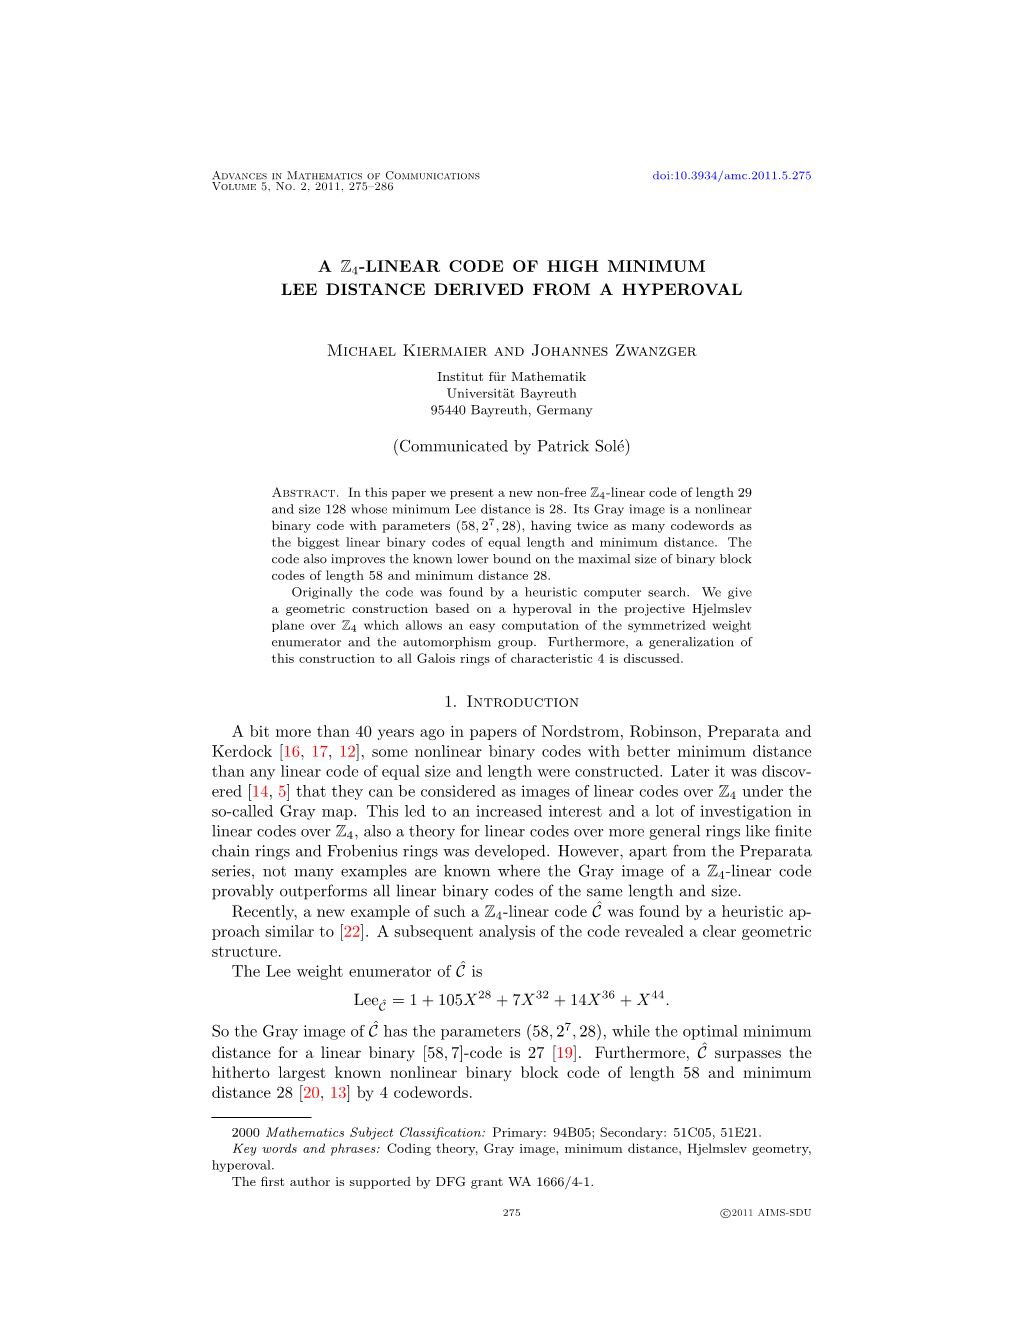 A Z4-Linear Code of High Minimum Lee Distance Derived from a Hyperoval